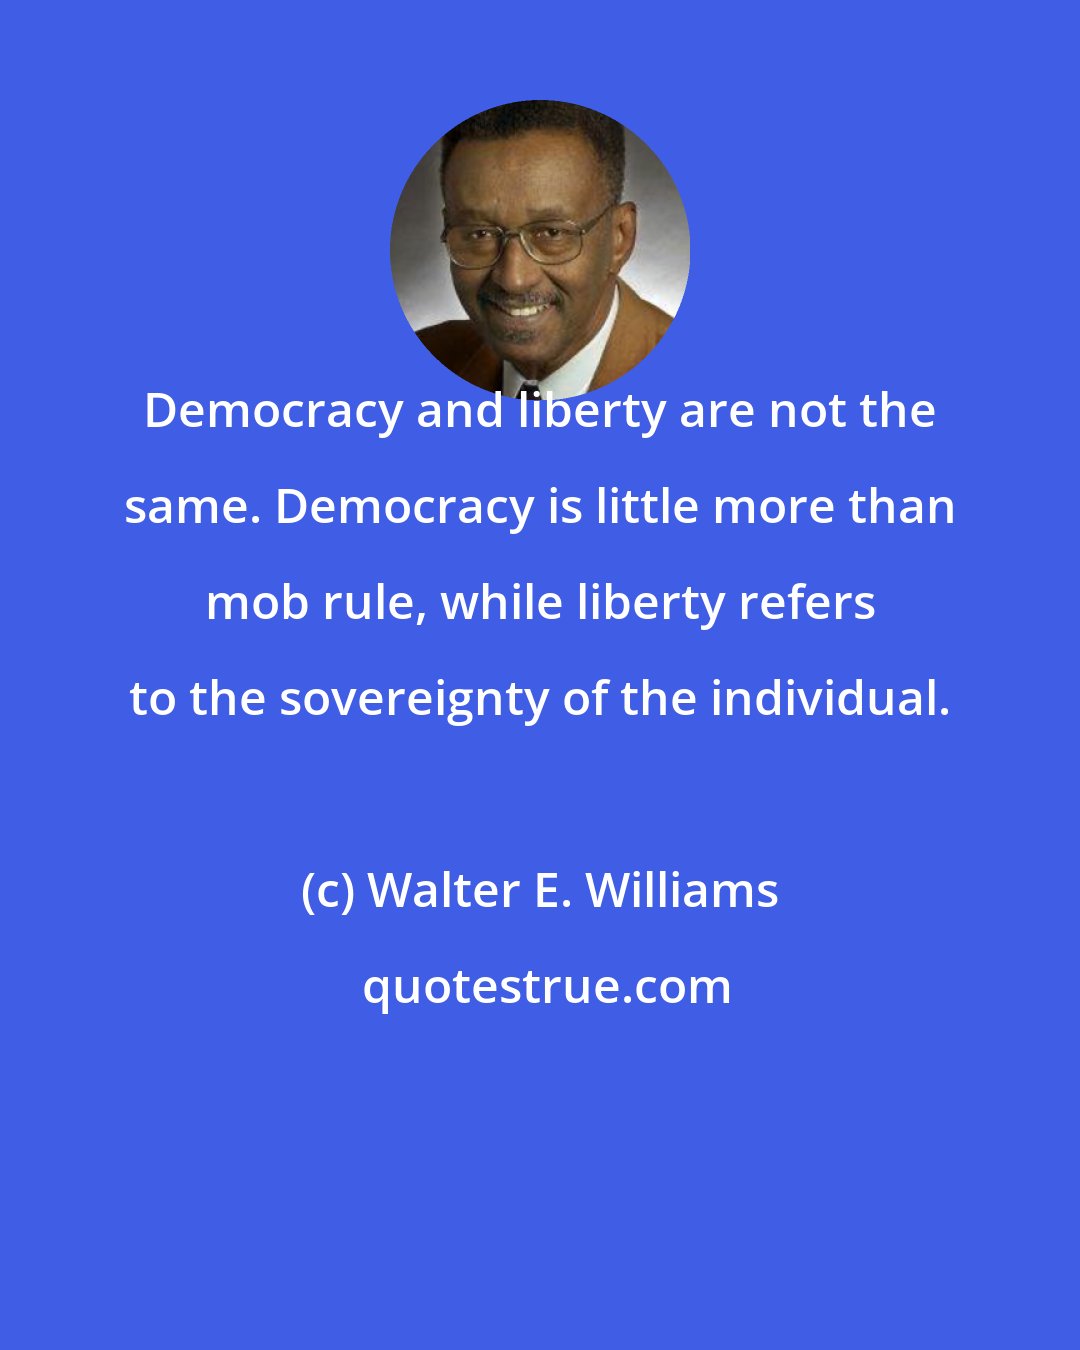 Walter E. Williams: Democracy and liberty are not the same. Democracy is little more than mob rule, while liberty refers to the sovereignty of the individual.